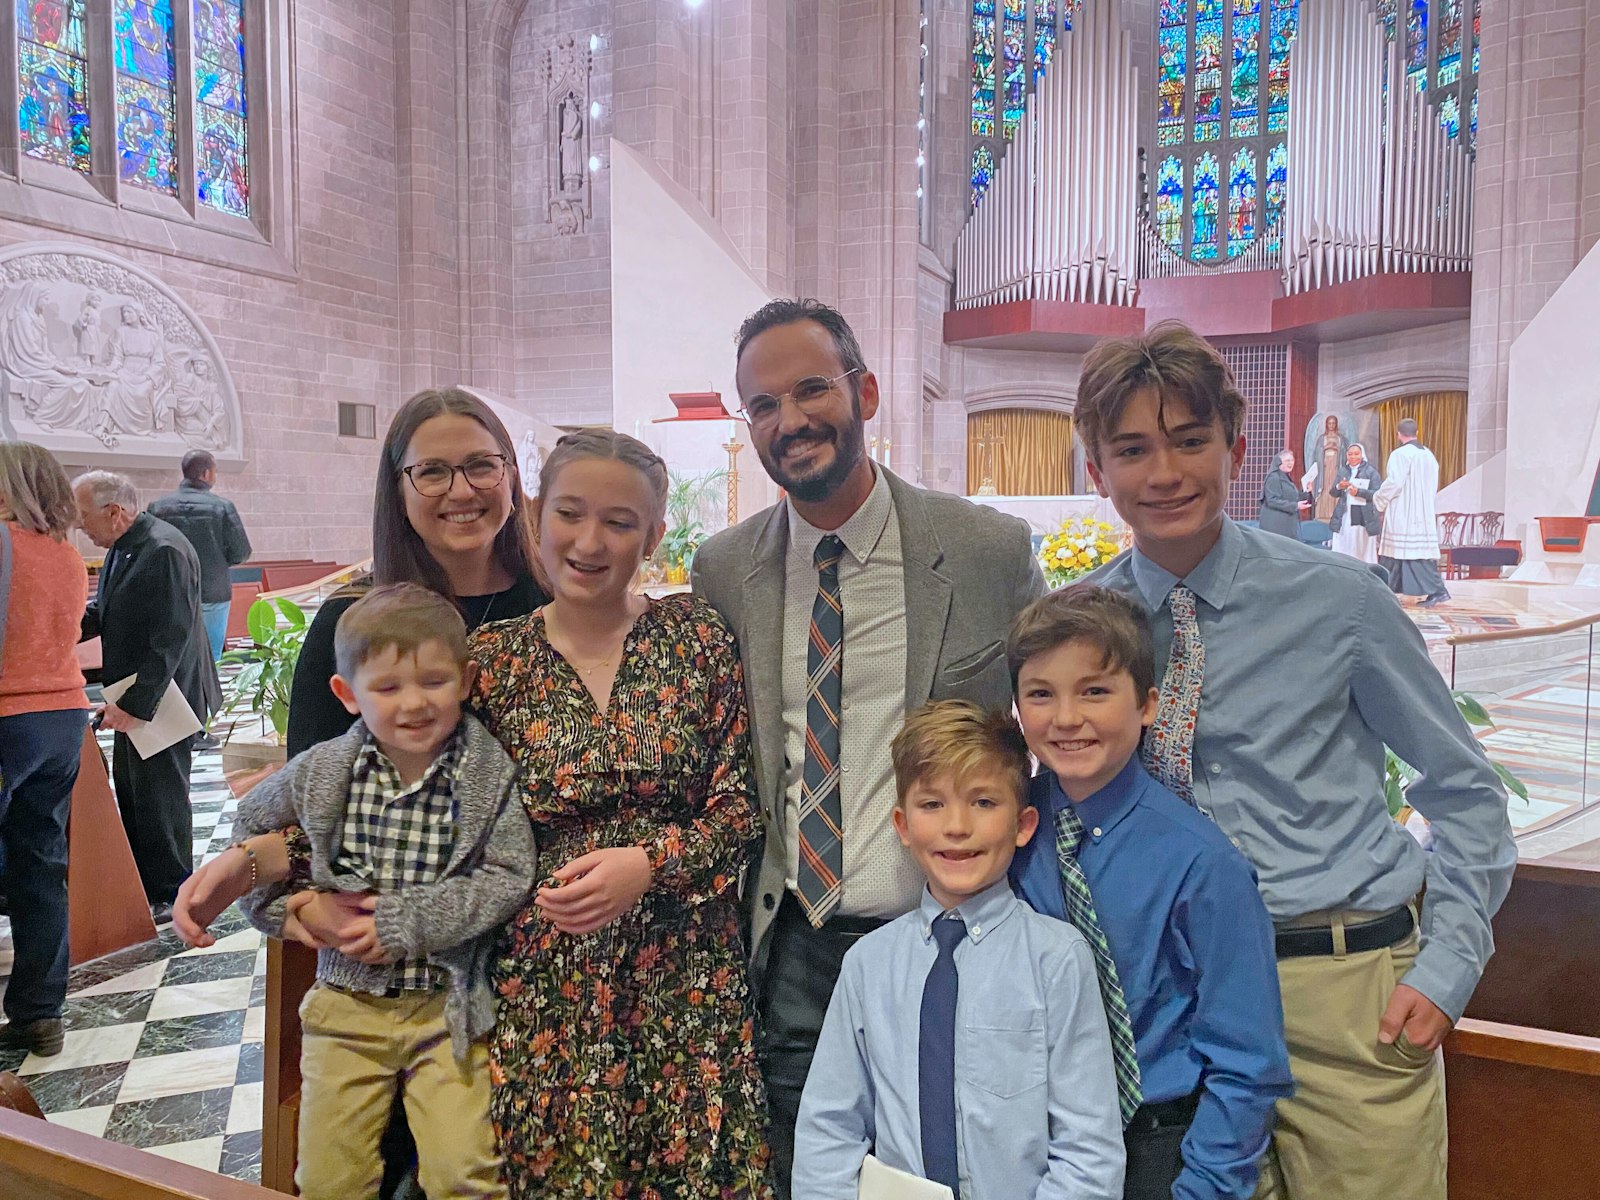 Giovanni Vitale with his wife, Lauren, and their children Louey, Giana, August, Leo and Zuke. The Vitale family welcomed Auxiliary Bishop Jeffrey Monforton on behalf of all families of the Archdiocese of Detroit. (Daniel Meloy | Detroit Catholic)